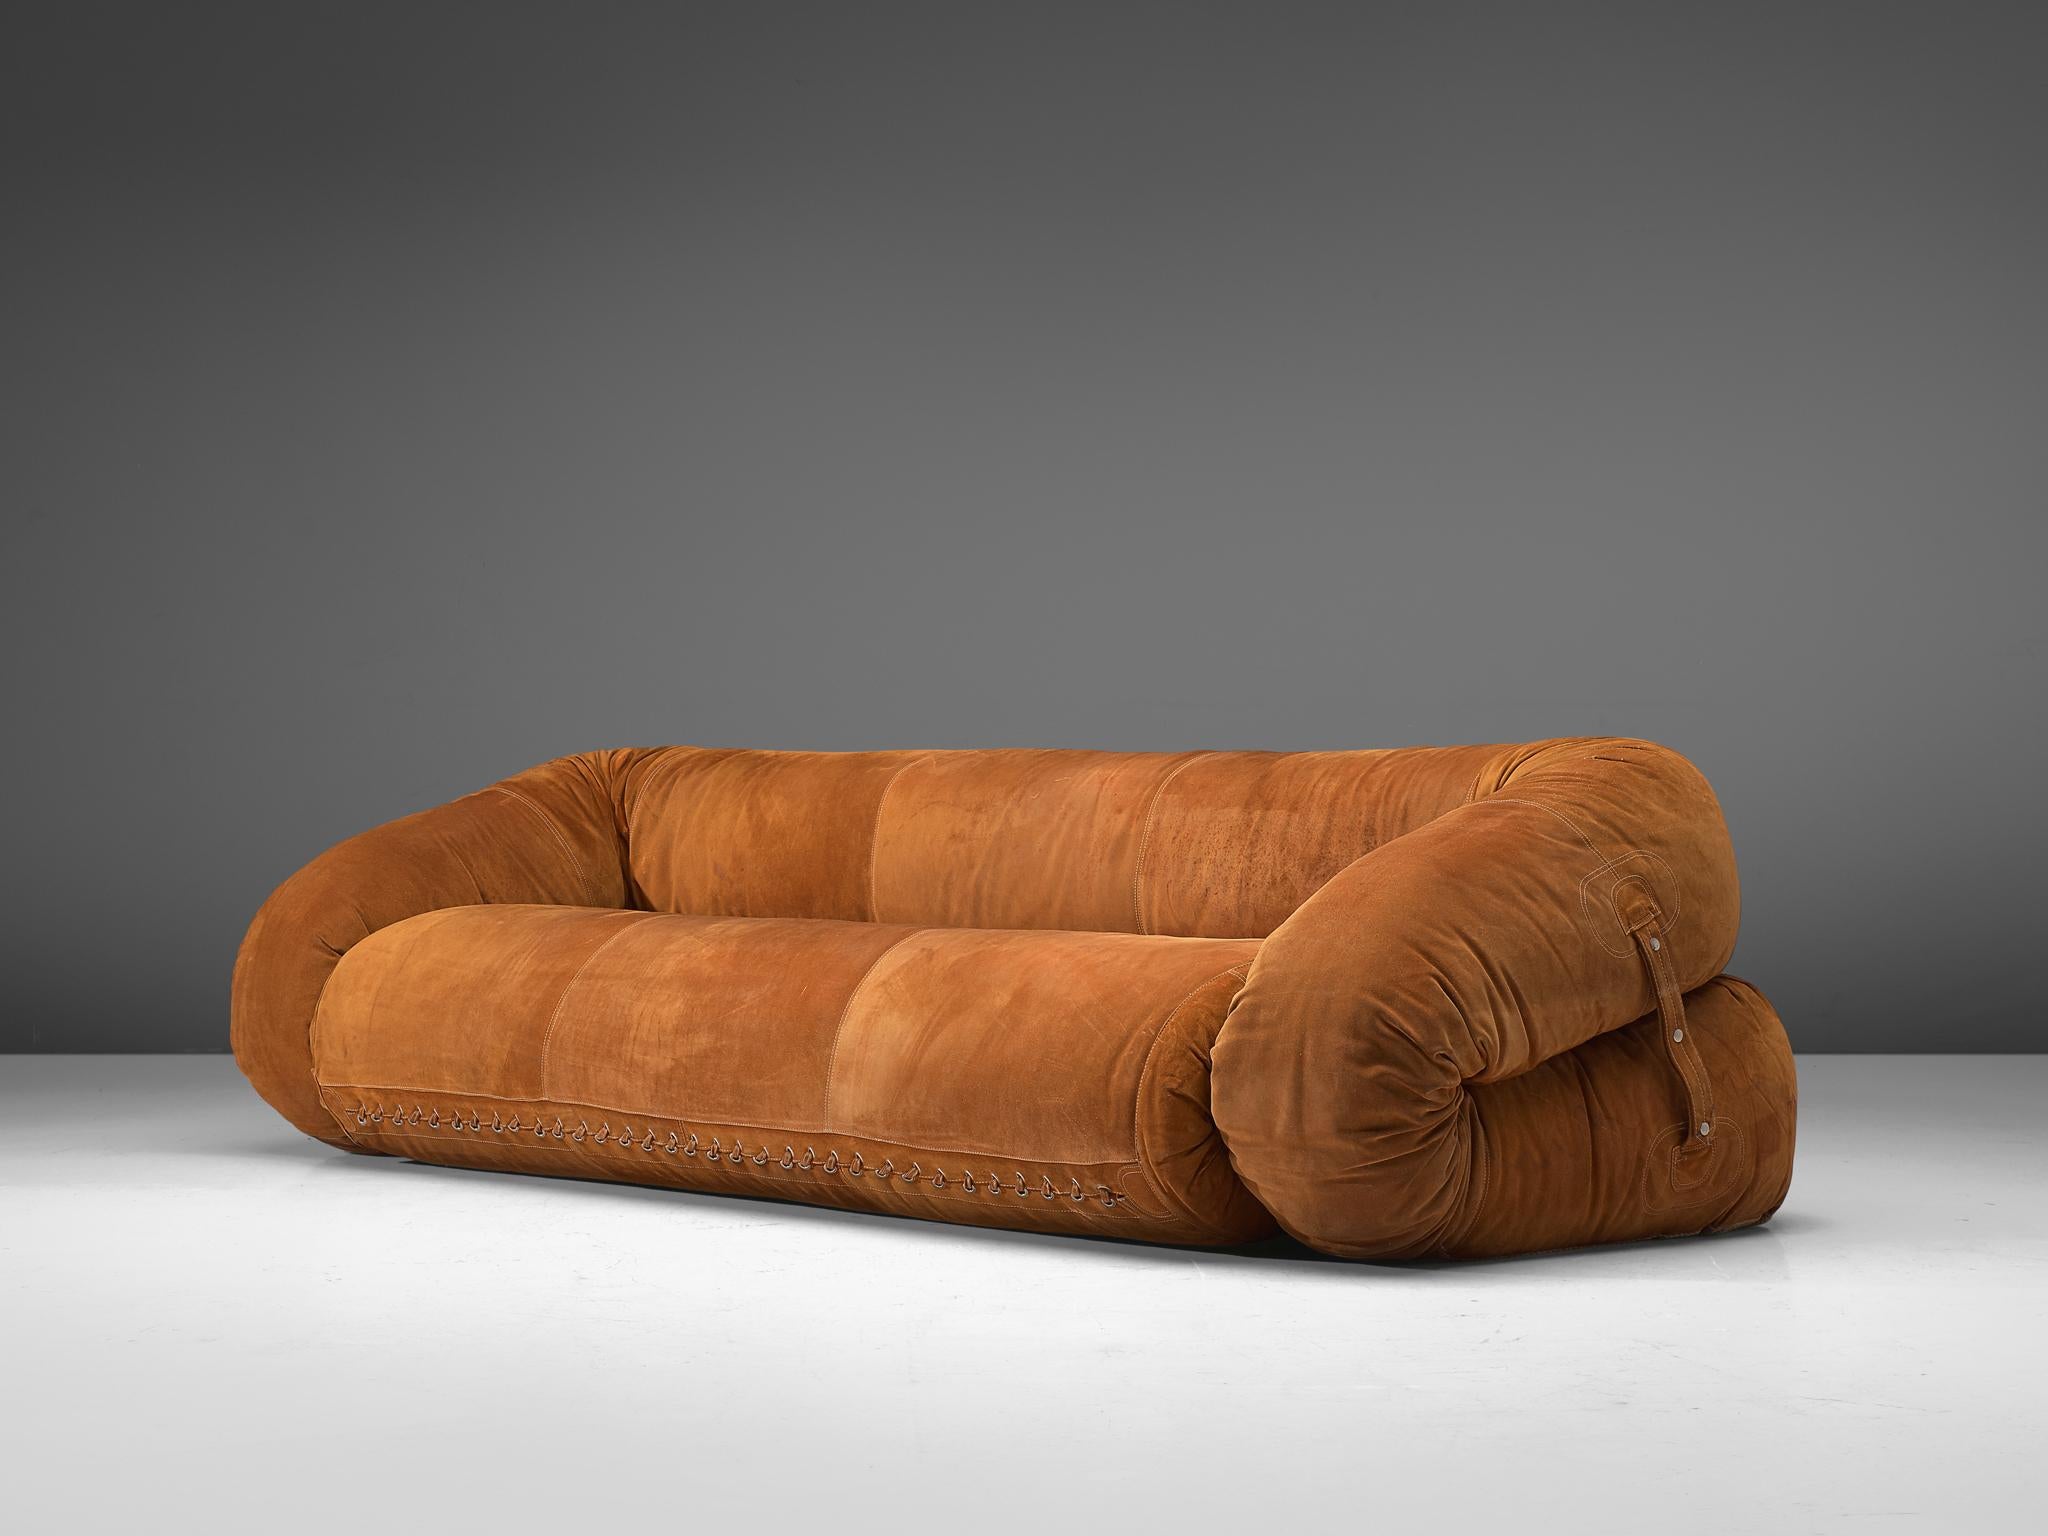 Alessandro Becchi for Giovanetti, Anfibio suede sofa bed, Italy, 1970s.

This rare 